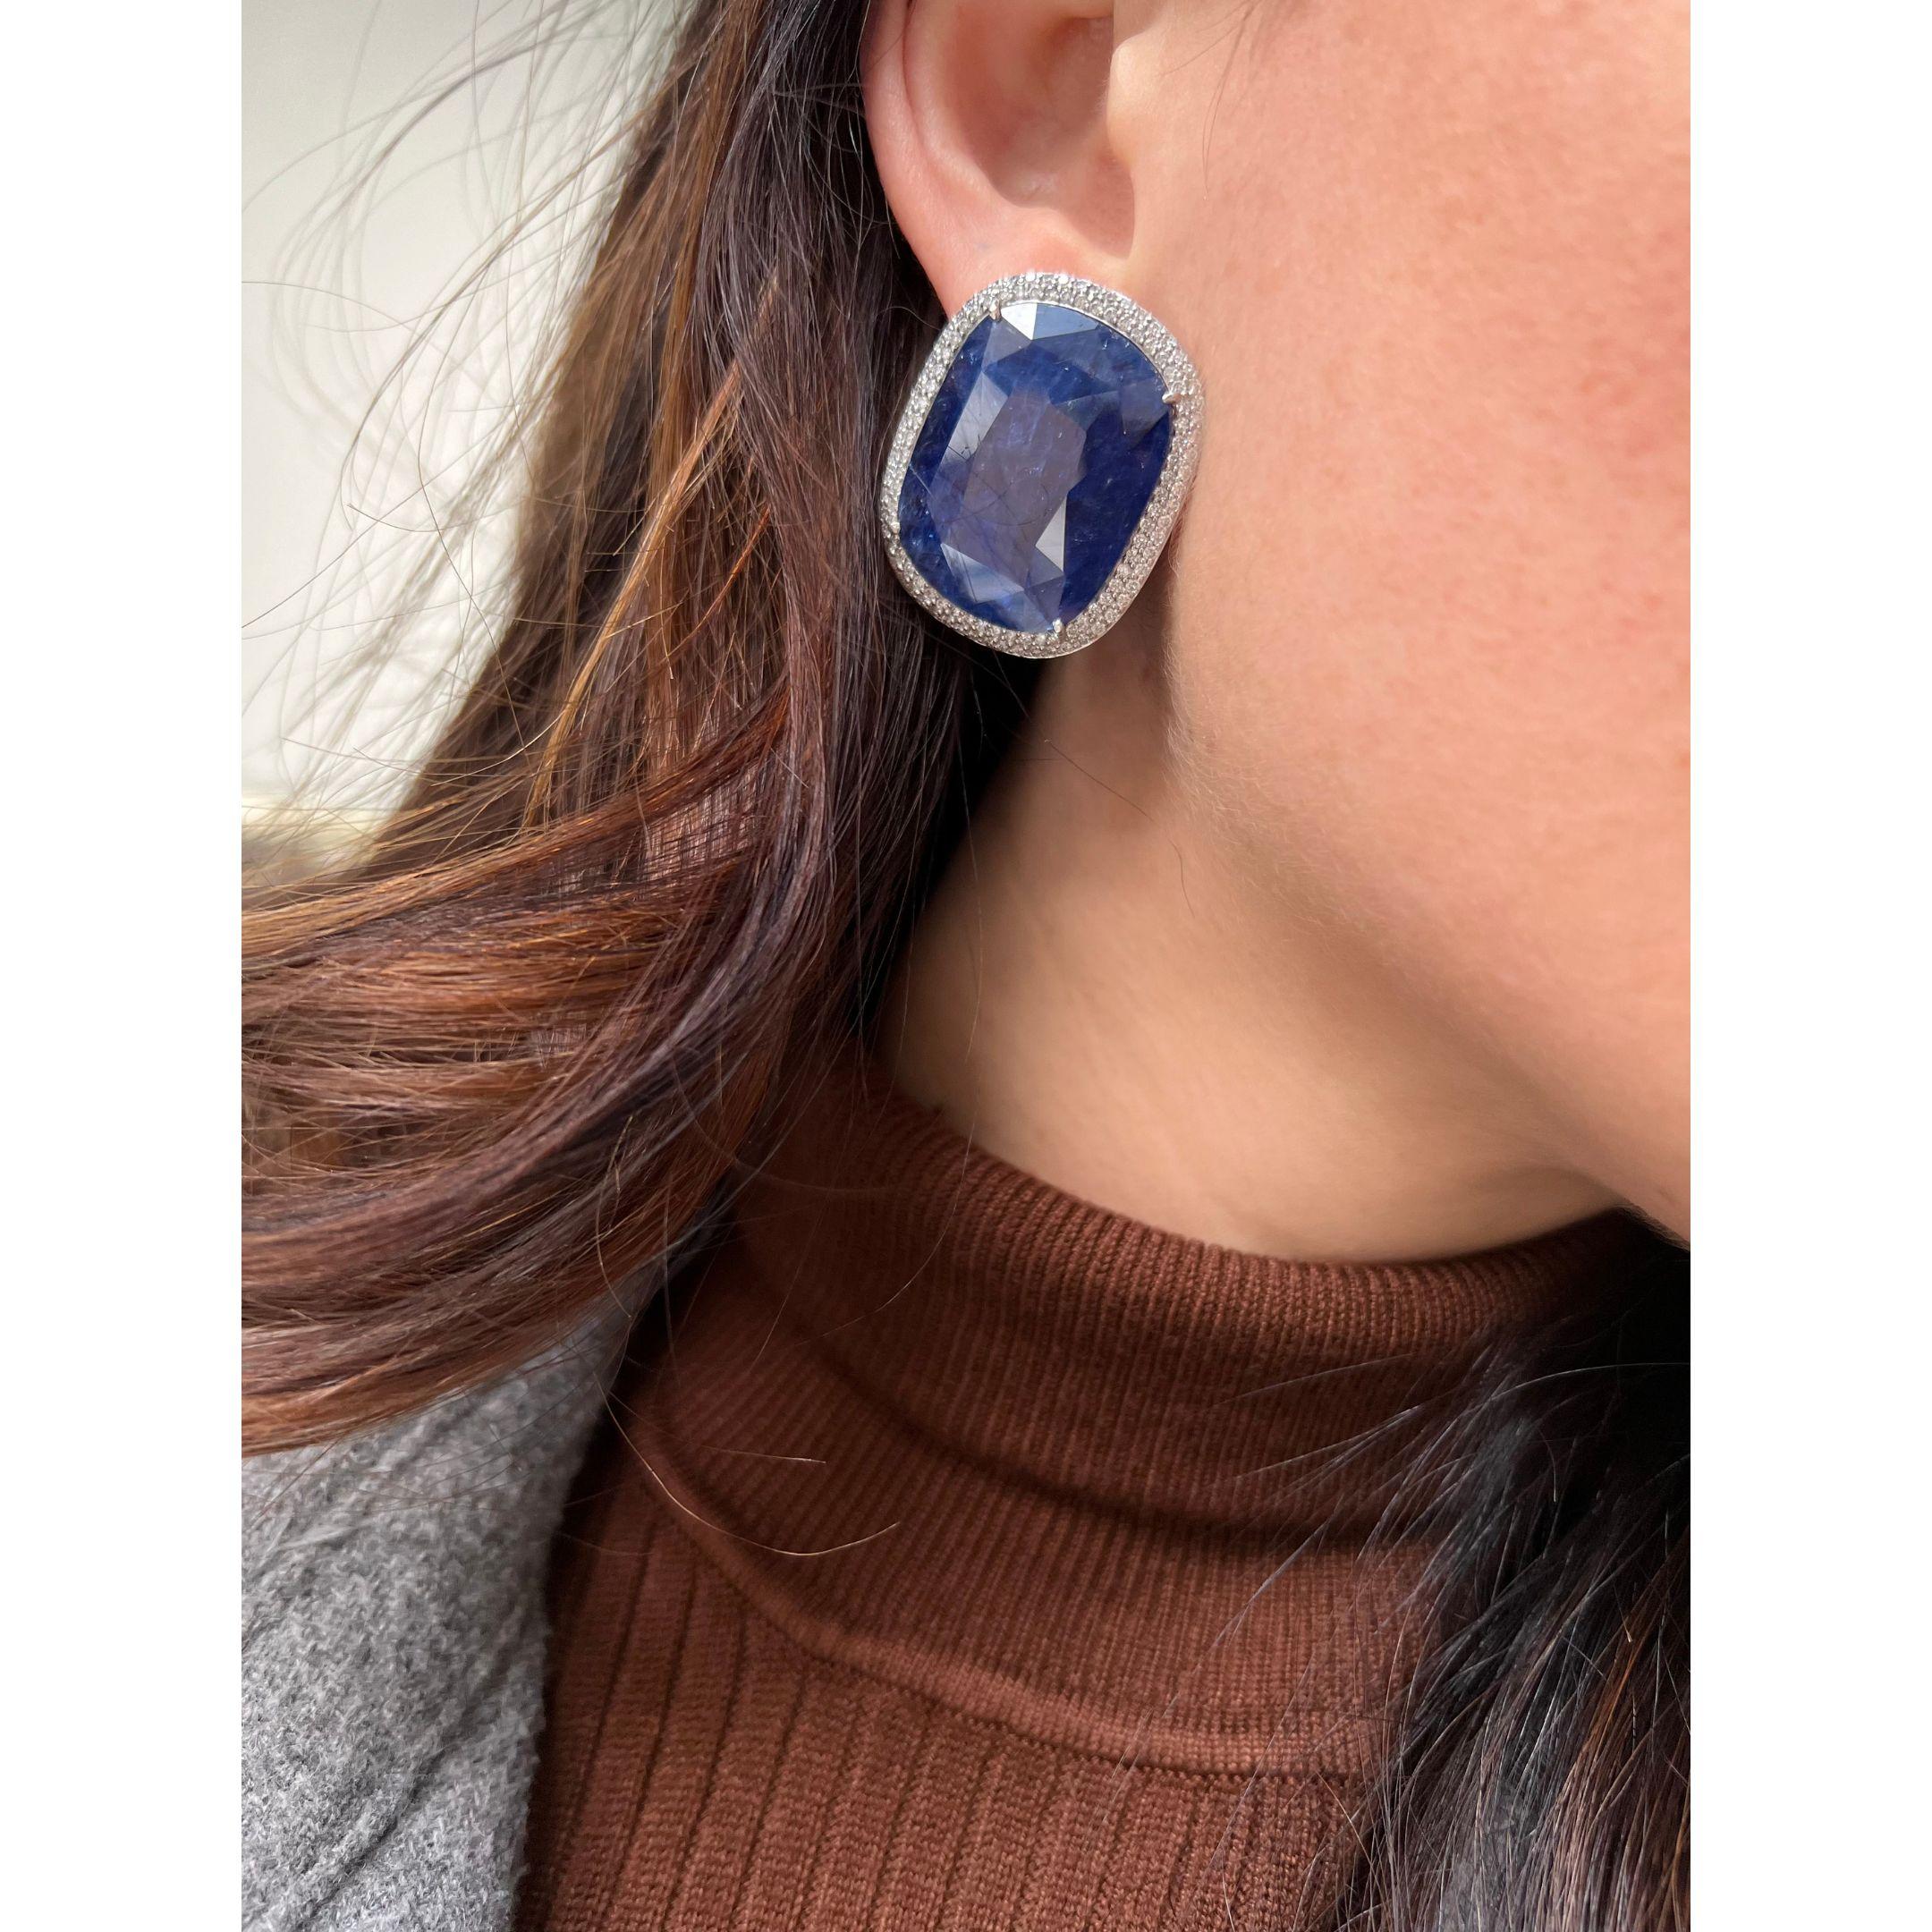 Sapphire Weight: 72.83 CTS
Metal: 18K White Gold
Shape: Cushion
Color: Intense Blue
No indications of heating 
Origin: Burma 
Hardness: 9
Birthstone: September
CD Certificate: 8682/1&2